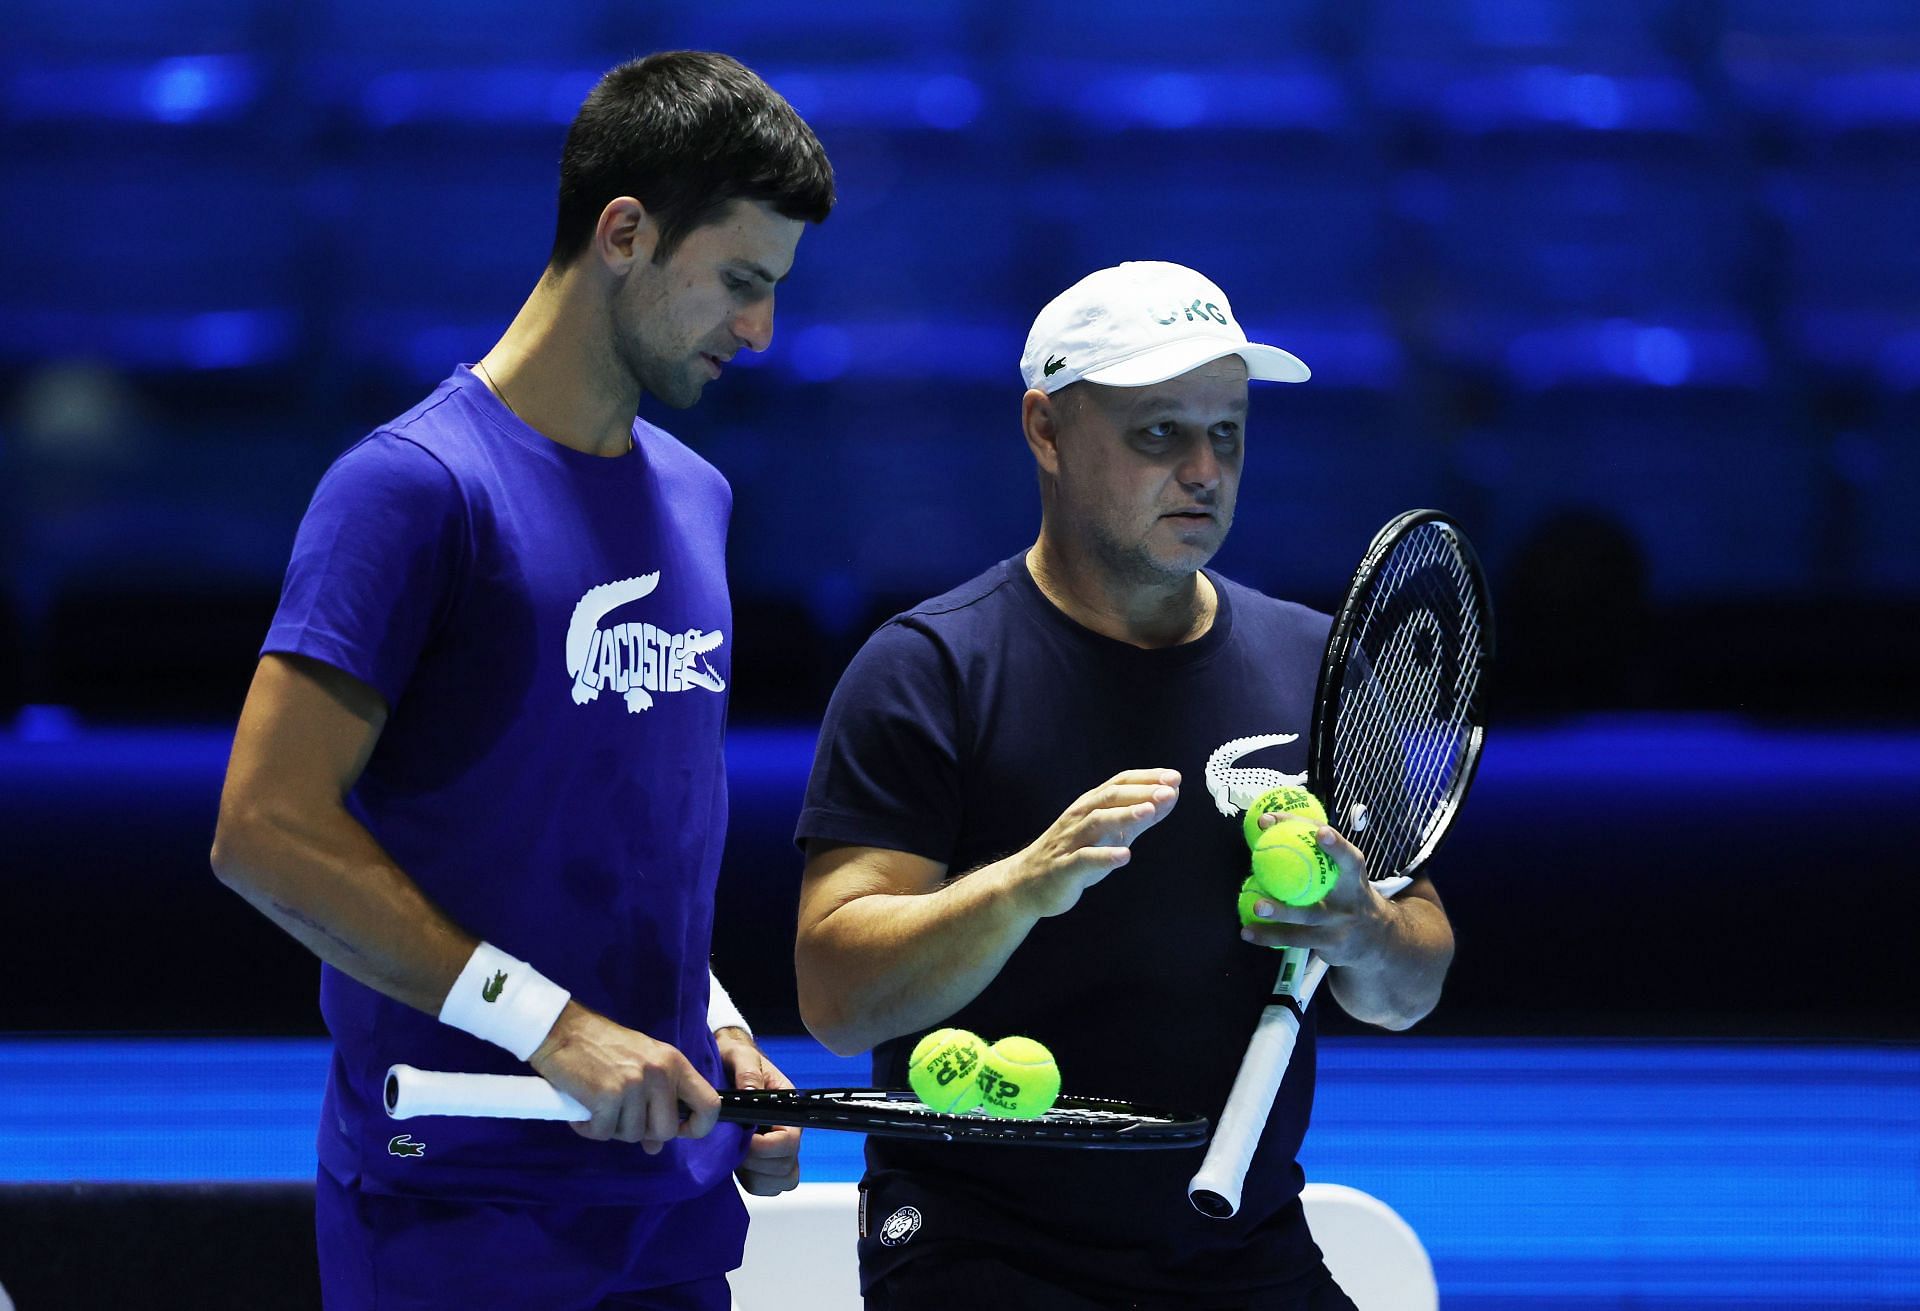 Novak Djokovic and Marian Vajda worked together for 15 years